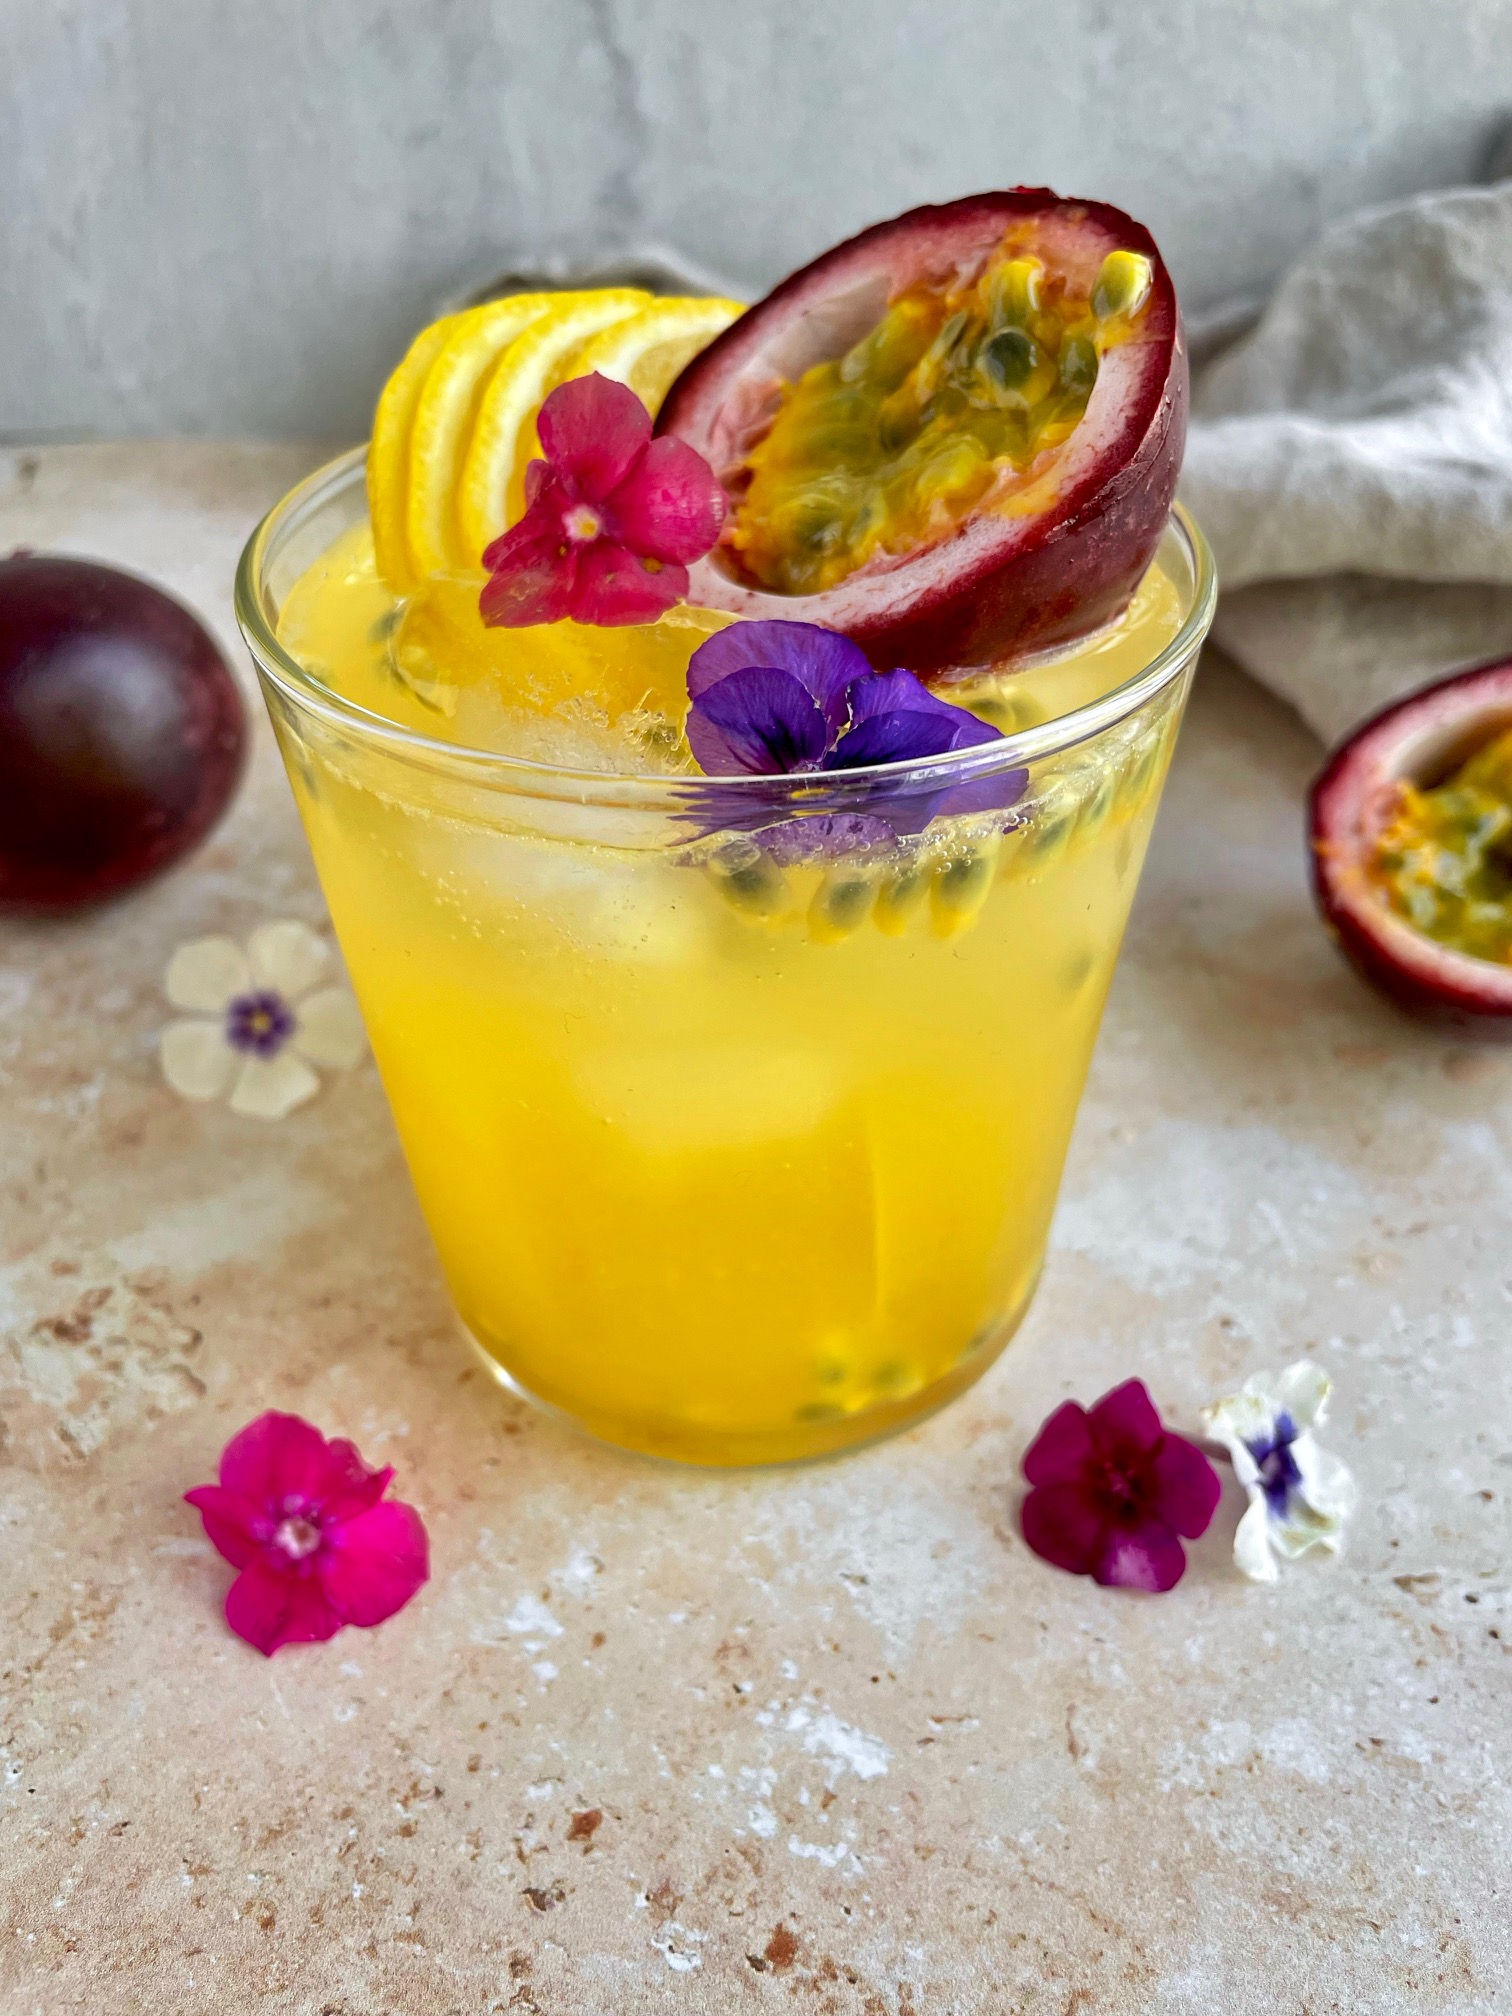 the completed passion fruit cocktail garnished with lemon slices, passion fruit and edible flowers.